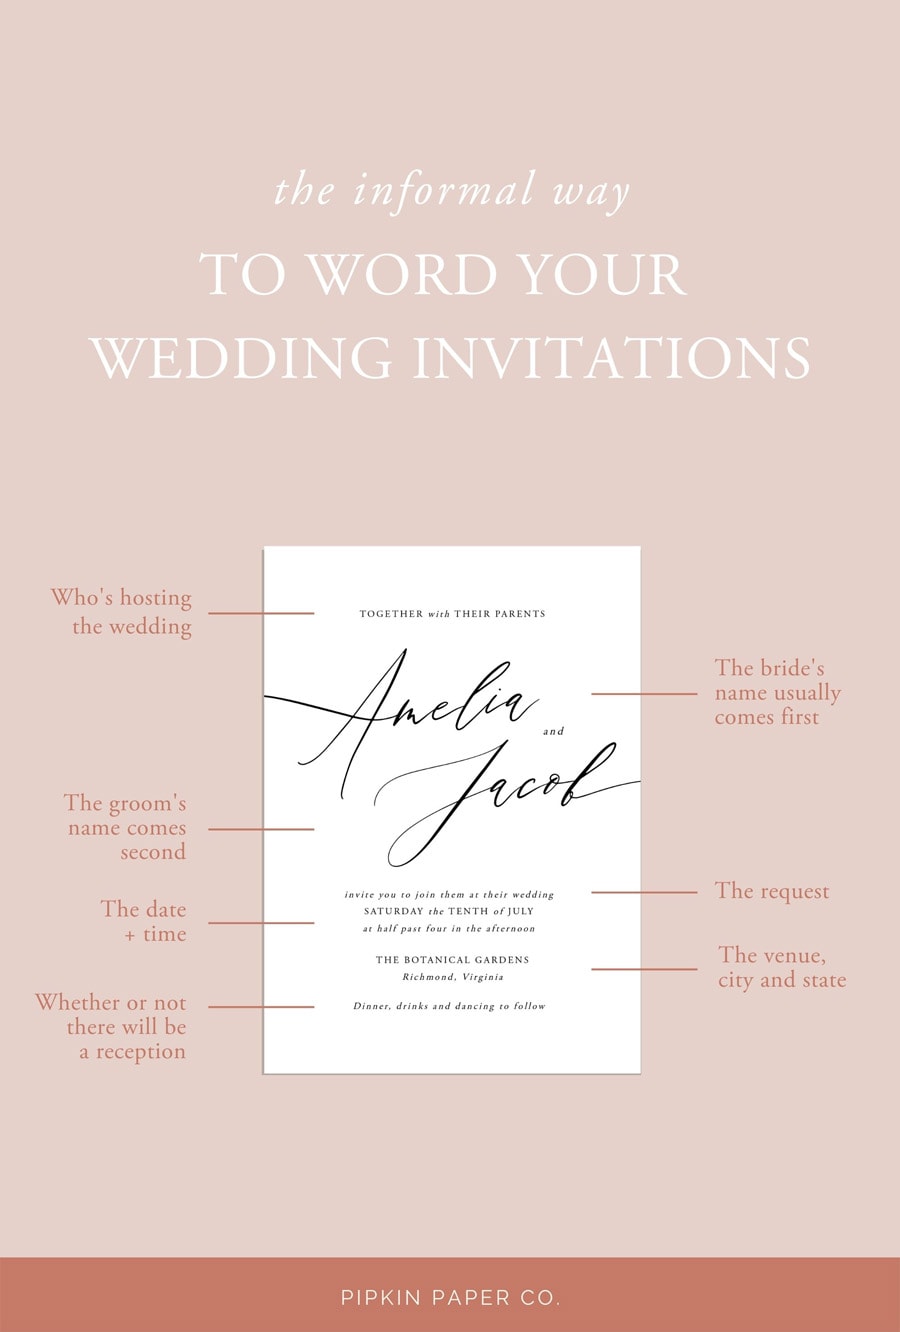 How to word your wedding invitations